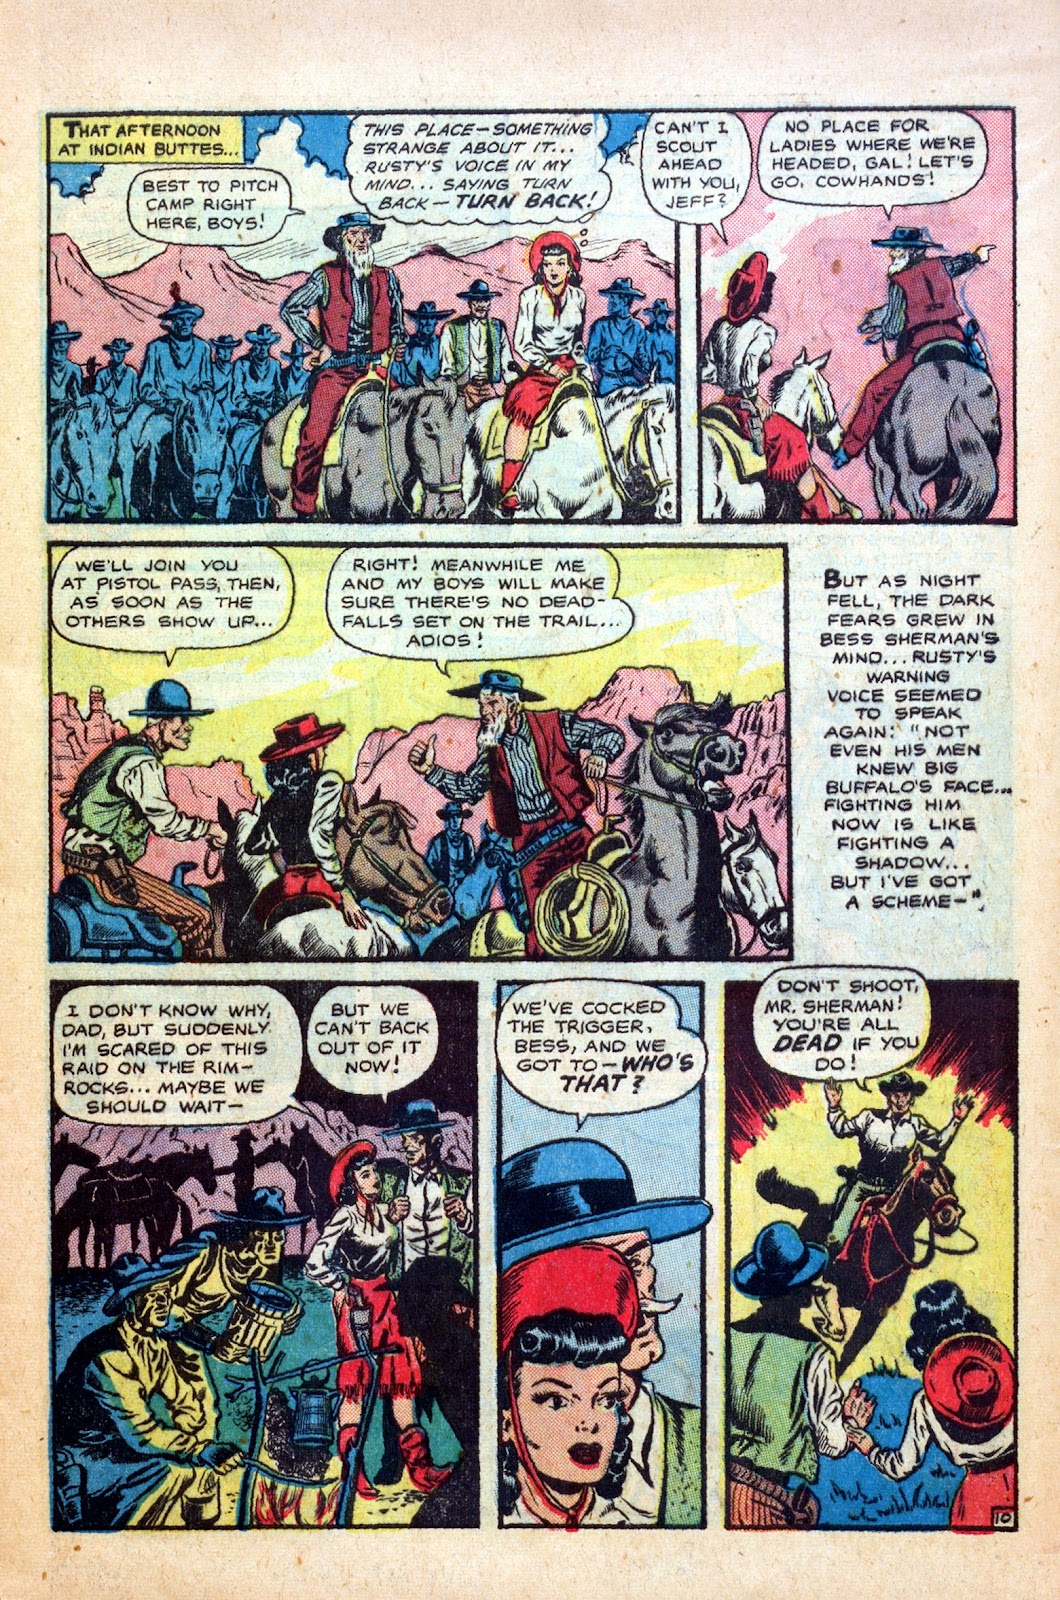 Cowgirl Romances (1950) issue 1 - Page 13